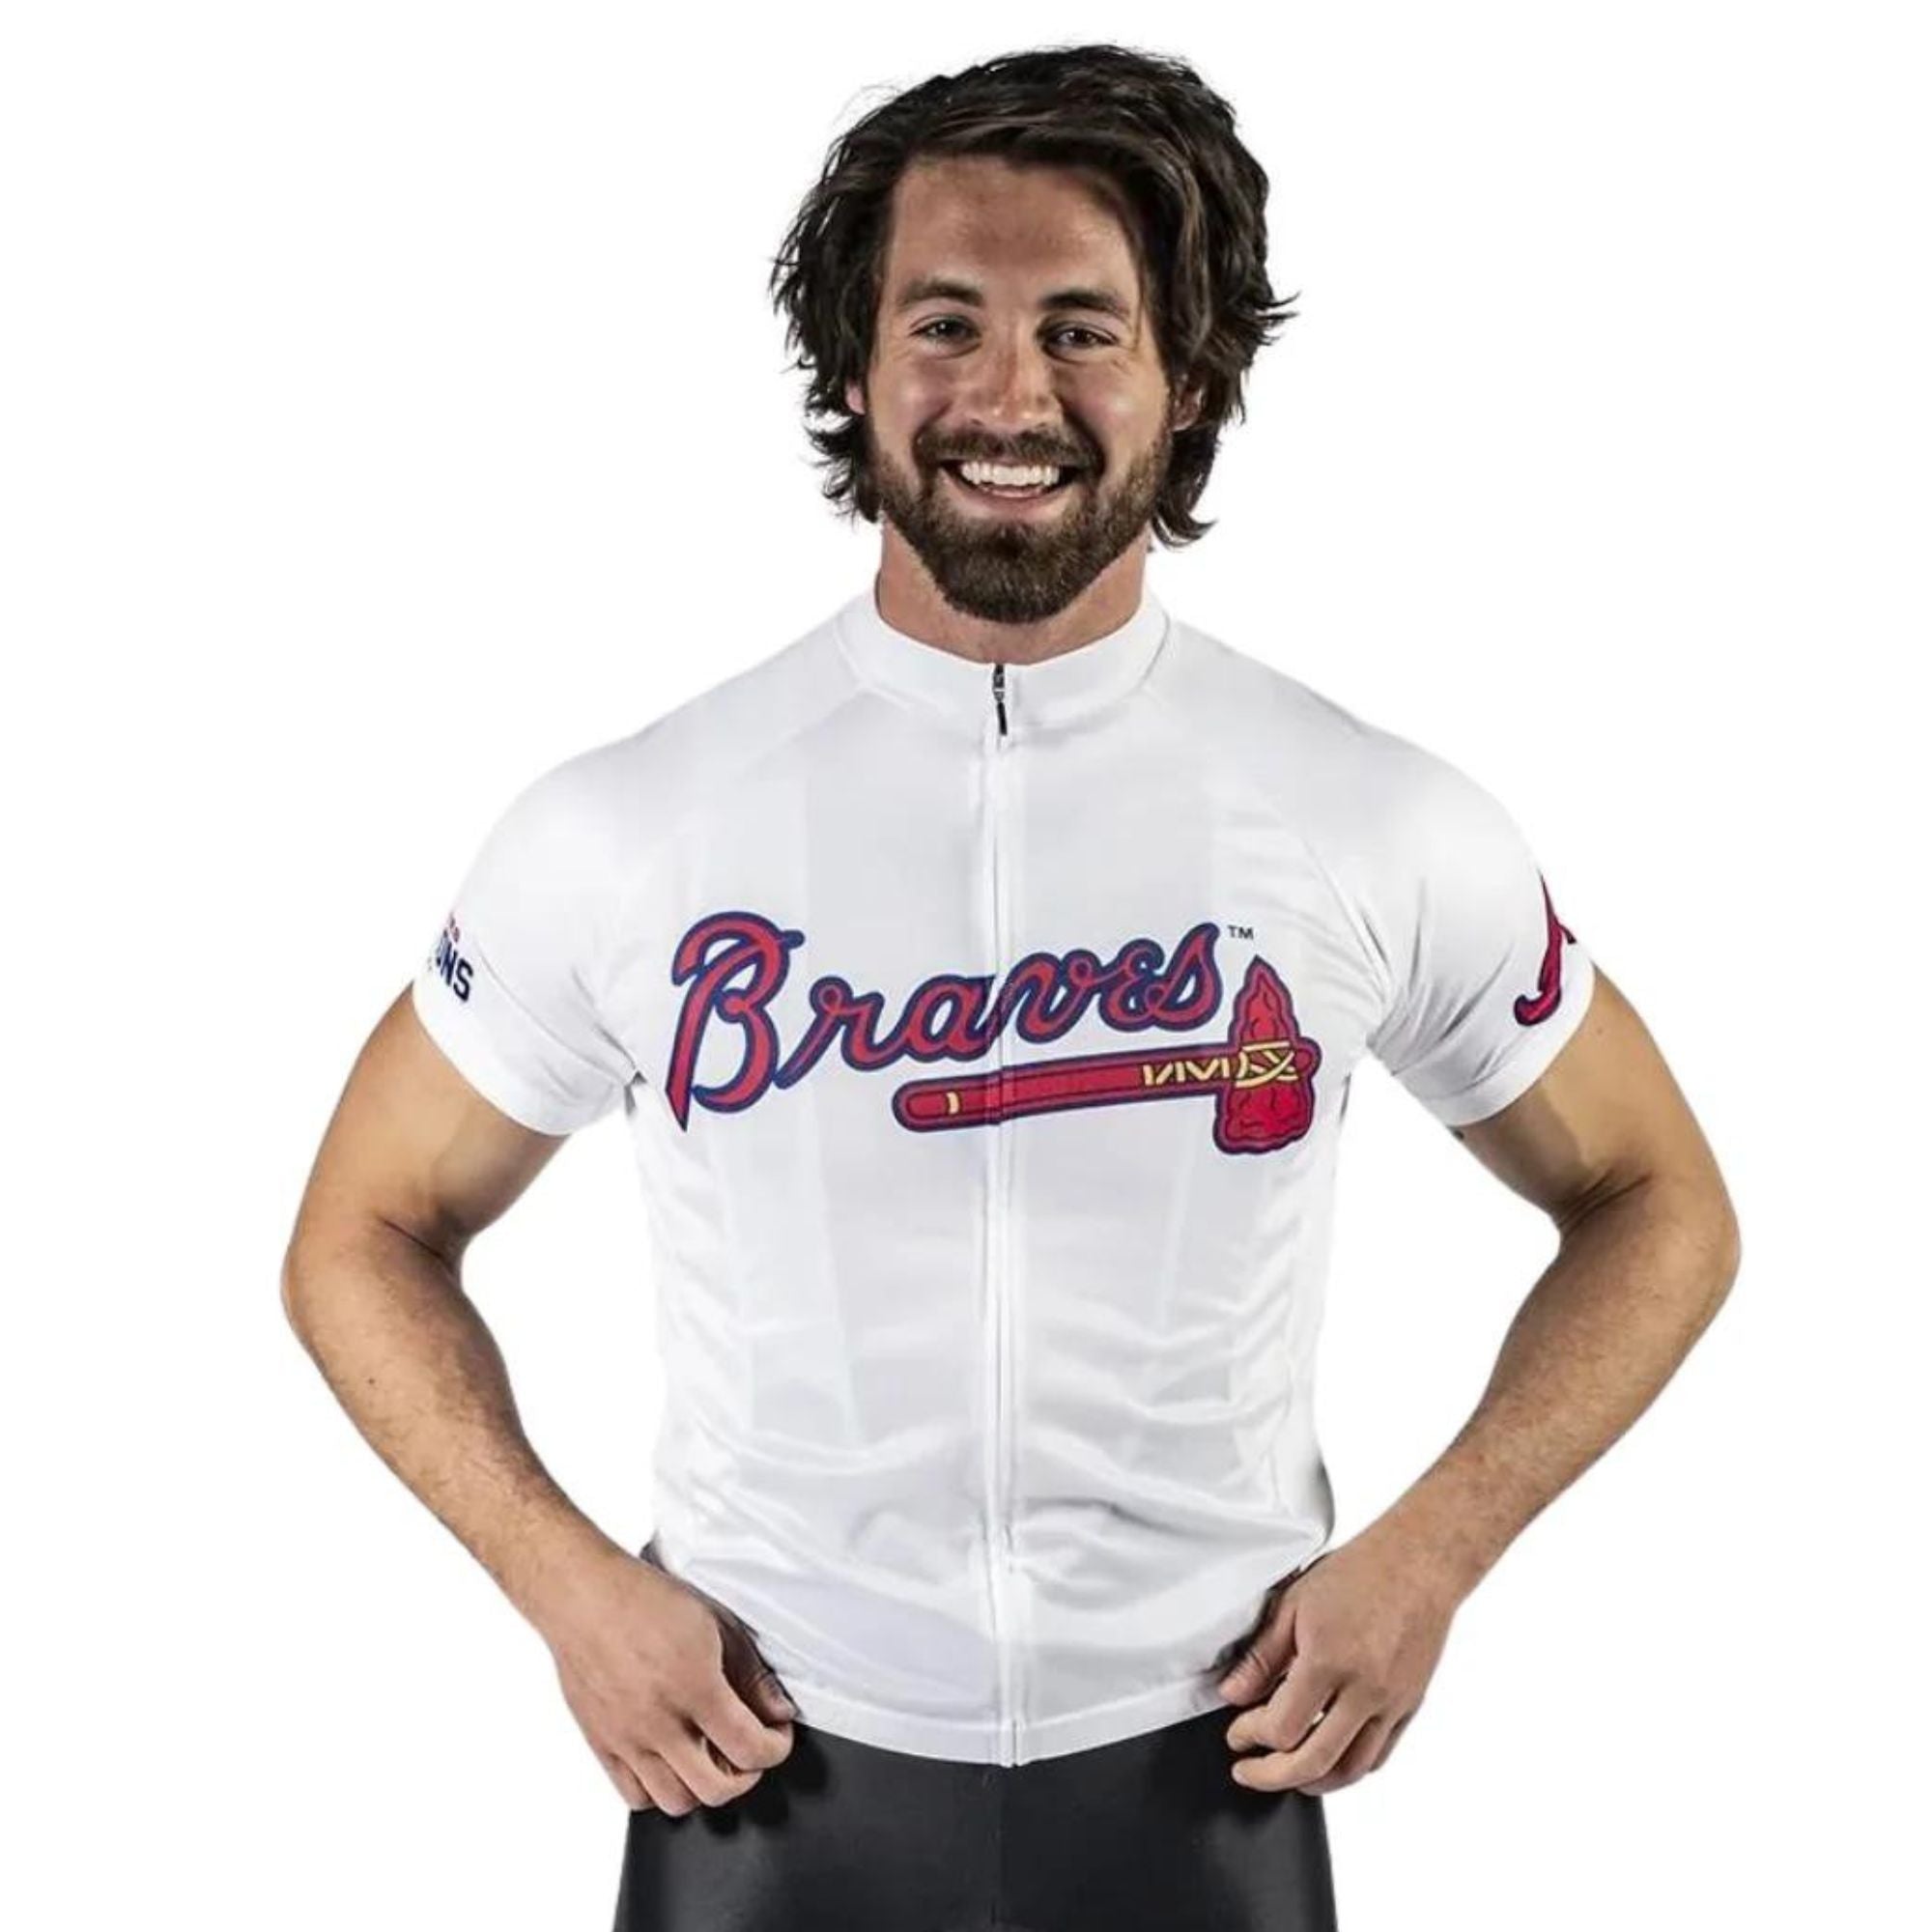 braves jersey youth xl